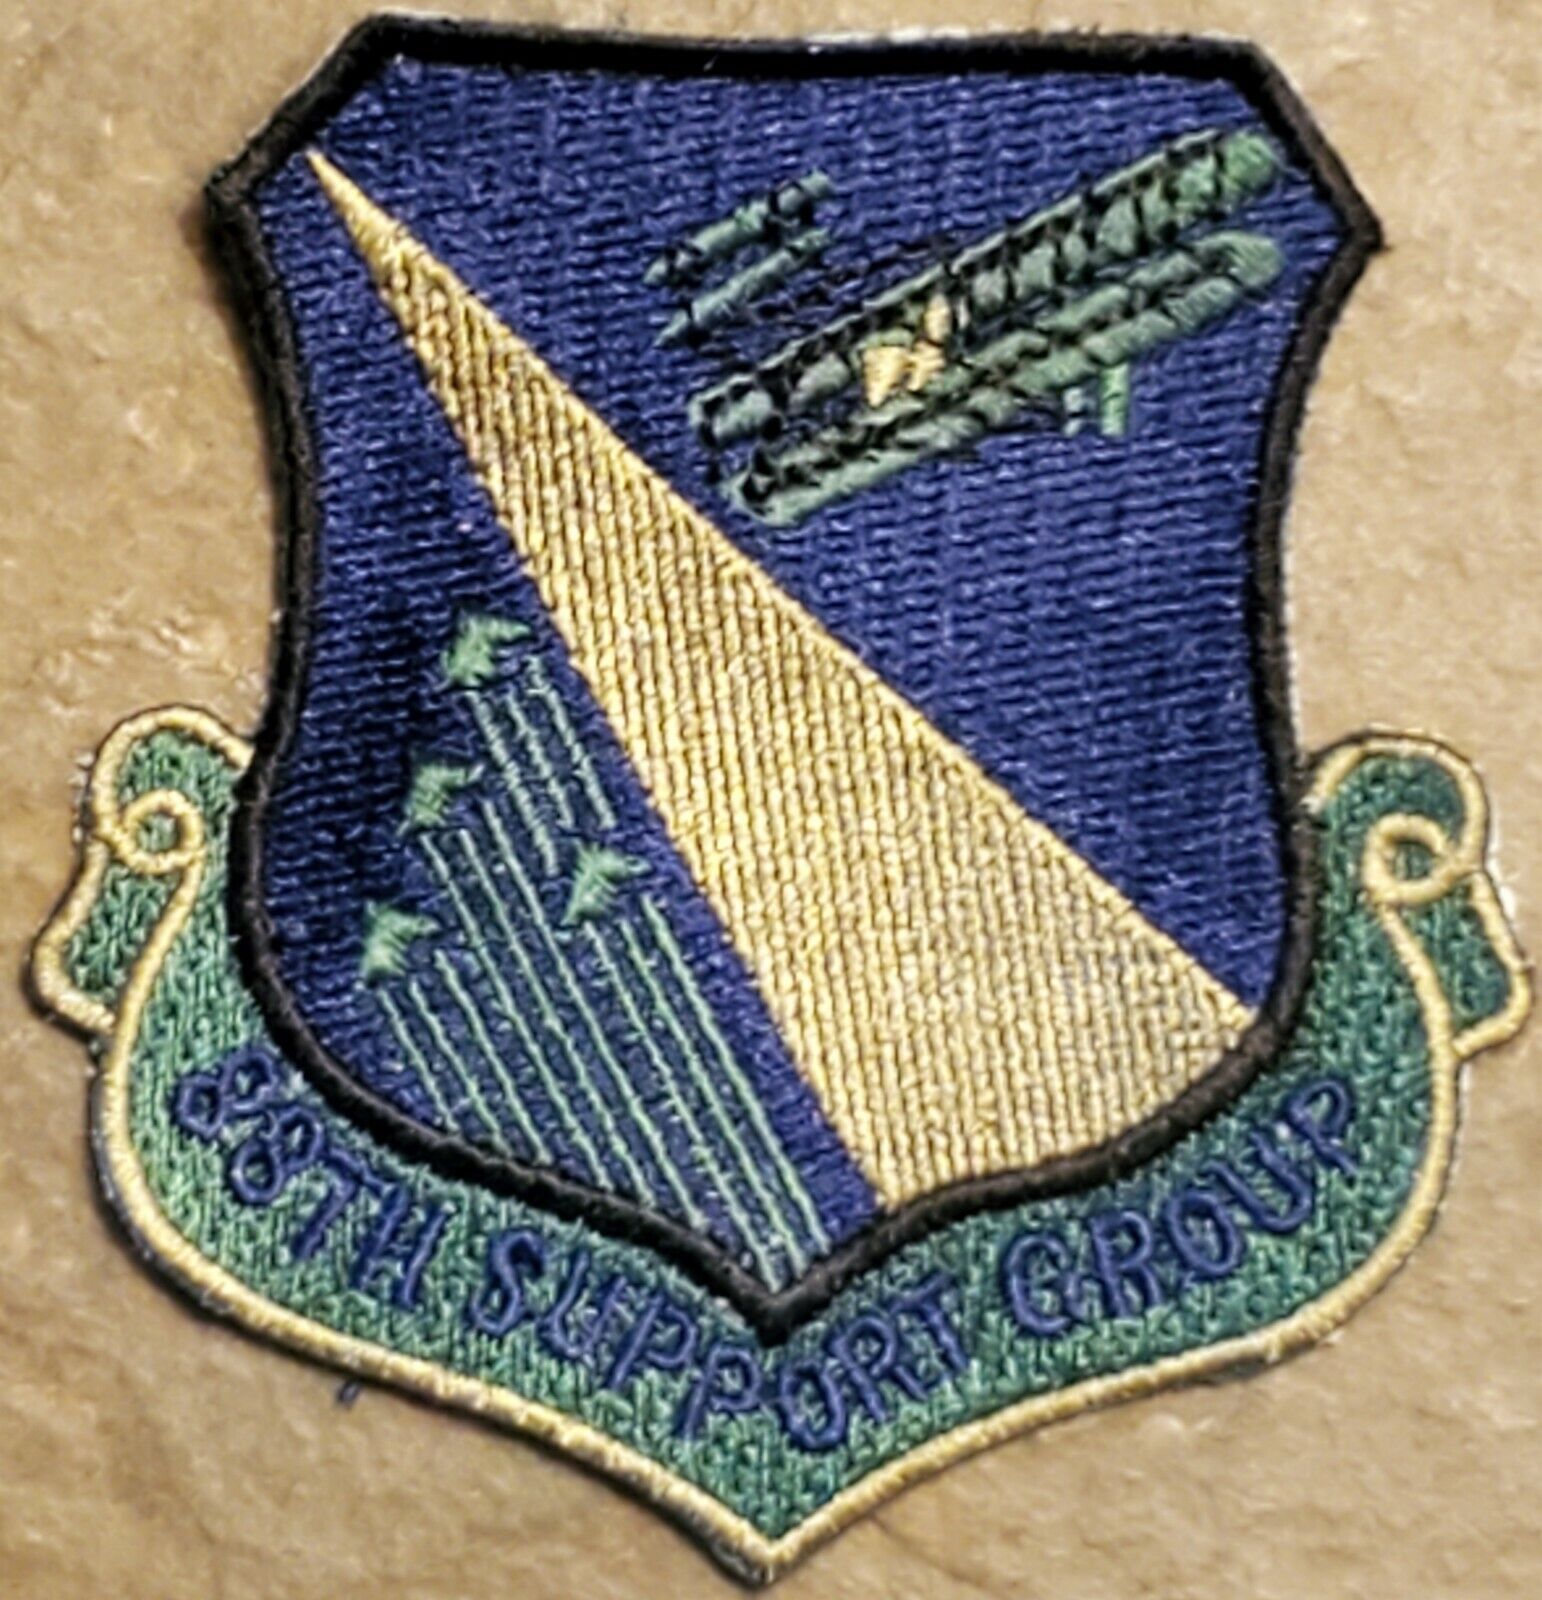 USAF AIR FORCE 88th Support Group Military Patch SUBDUED ORIGINAL VTG MILITARY 